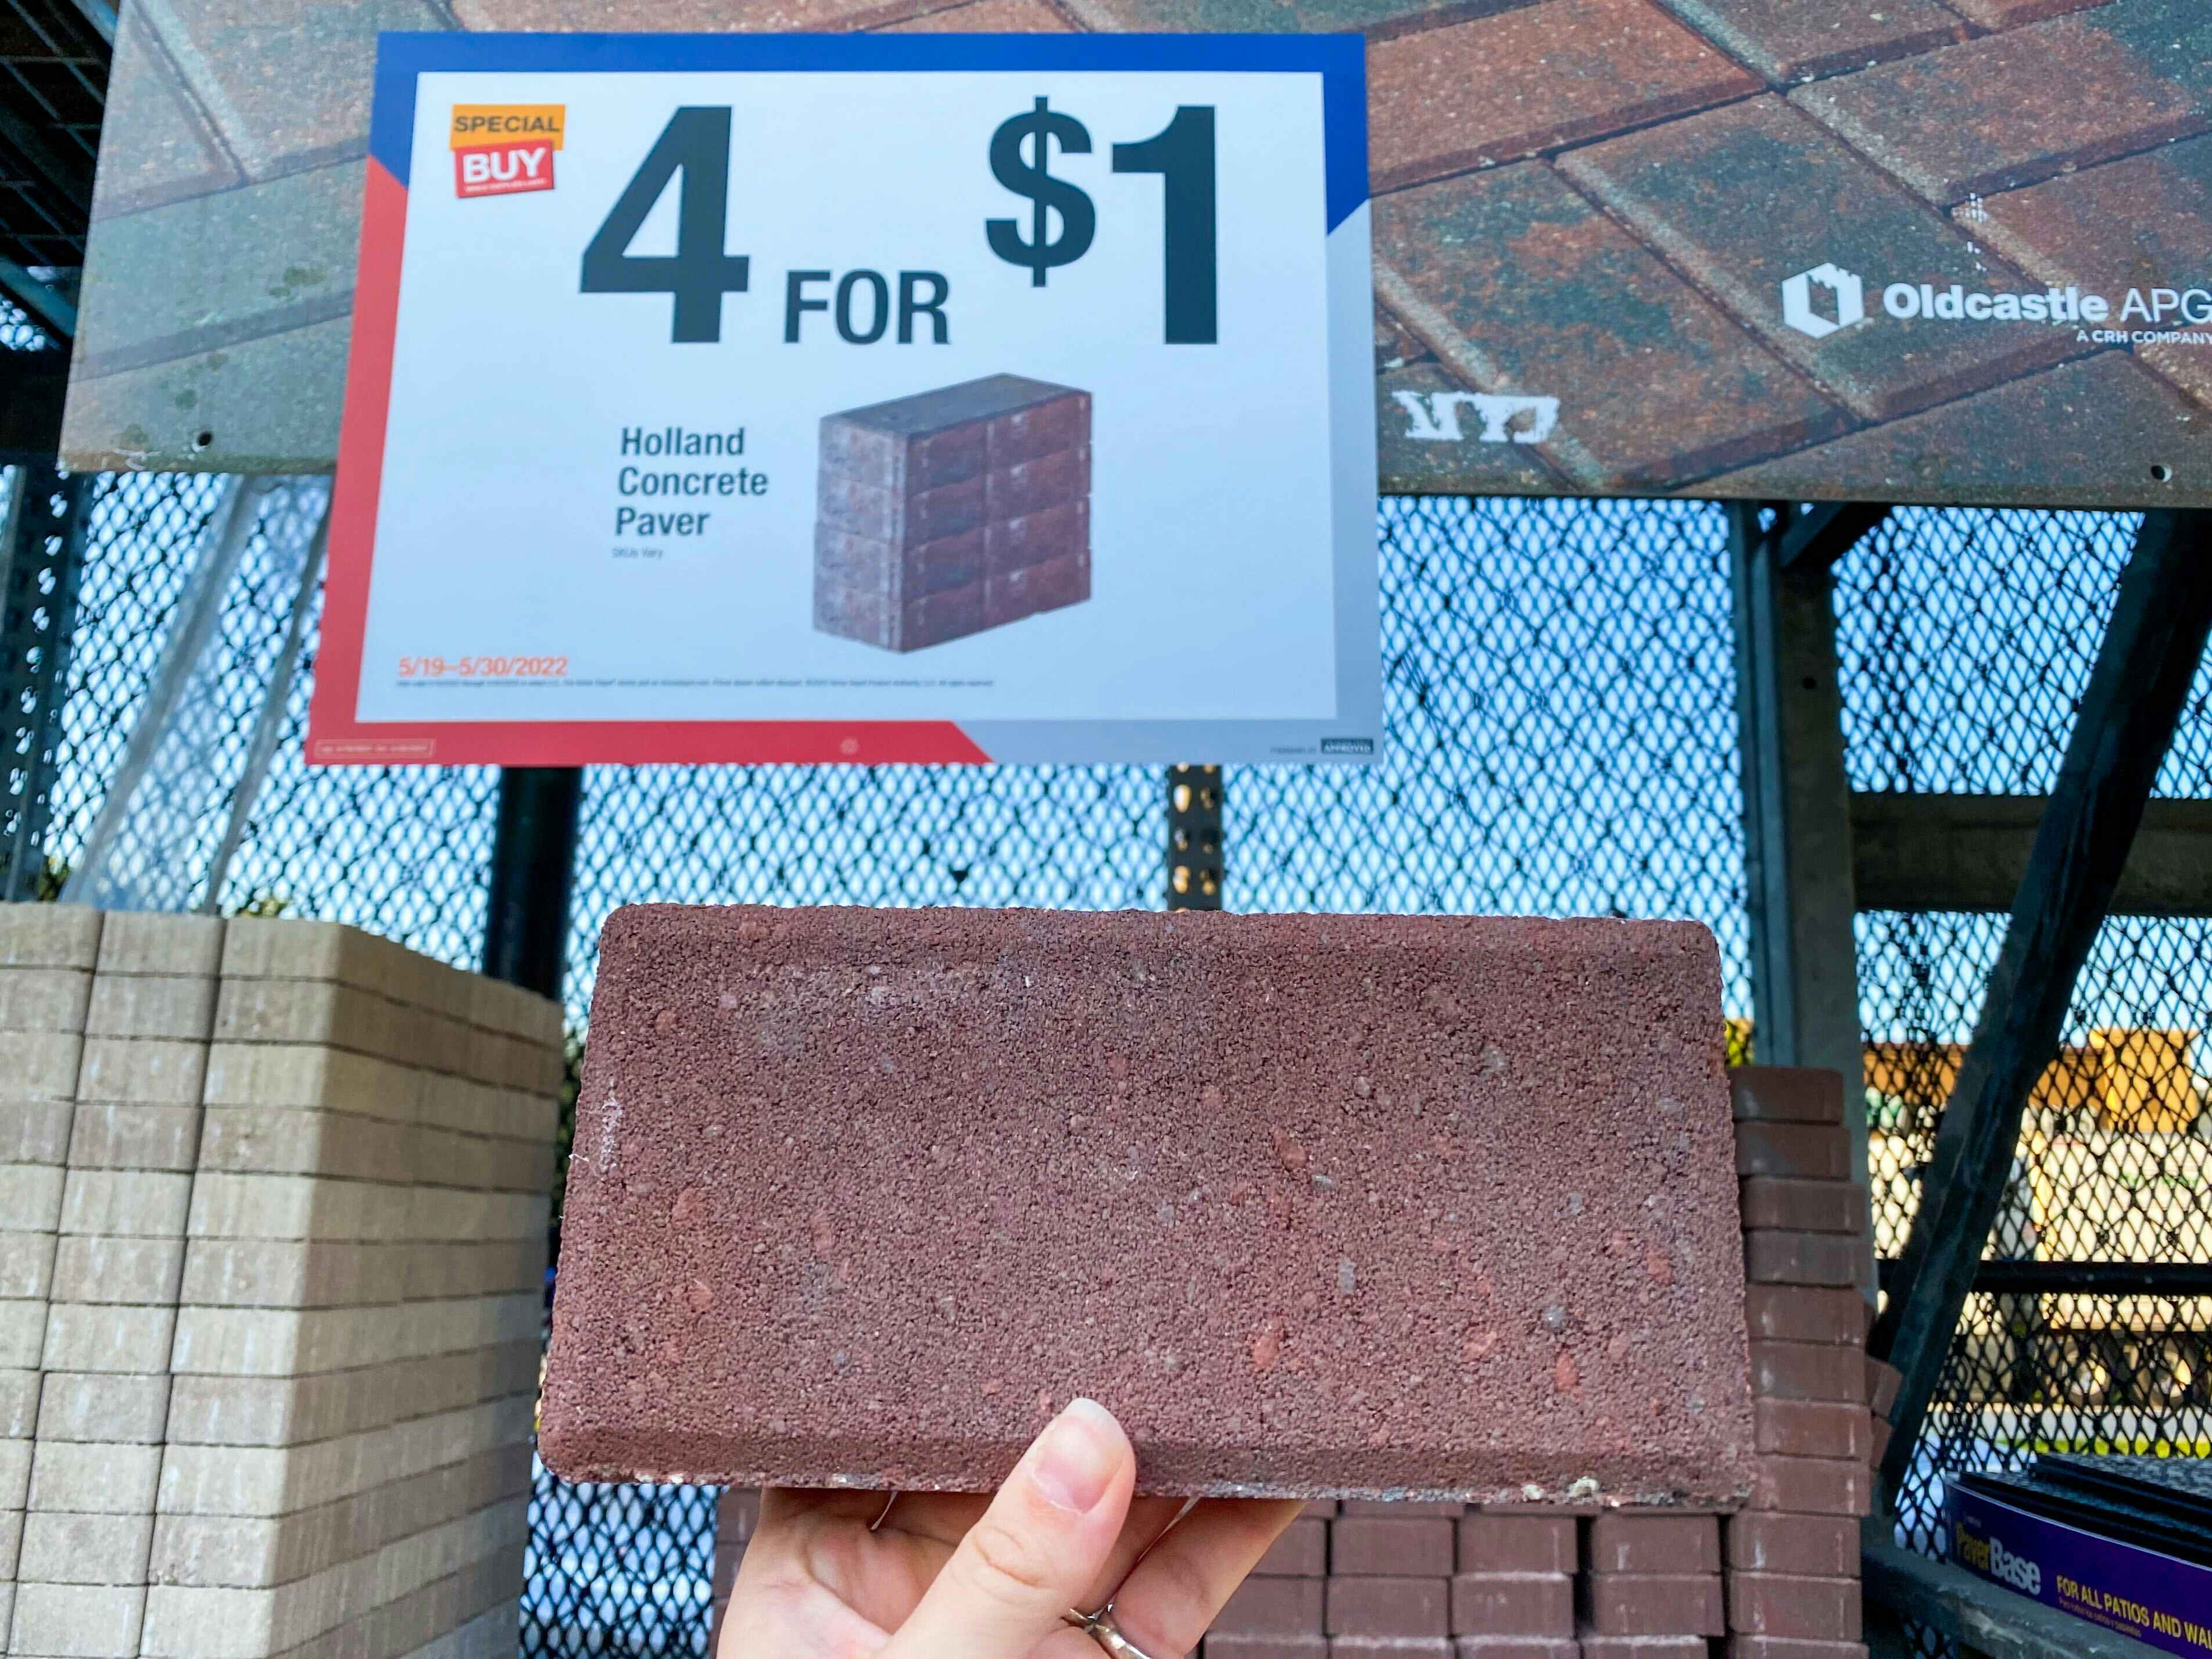 one concrete paver at home depot next to a 4 for $1 concrete pavers sign